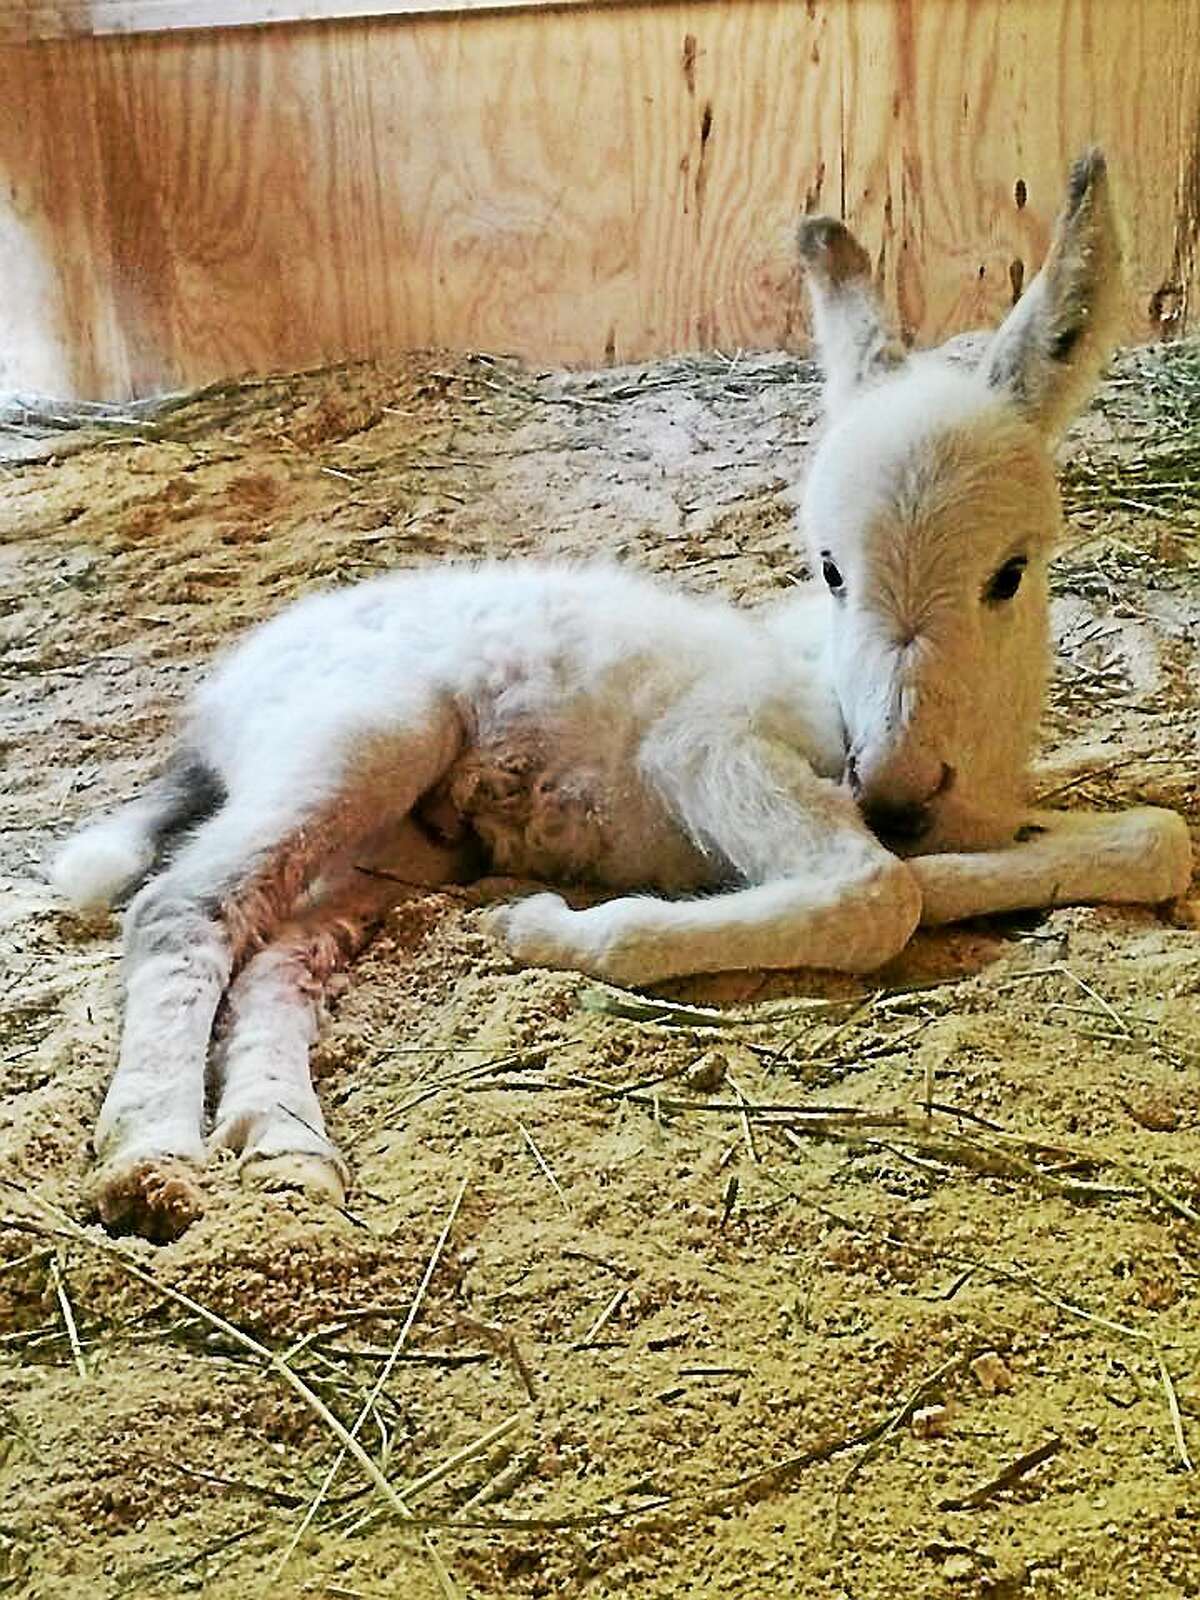 This healthy foal was born May 10 and is named BOGO based on suggestions on Red Skye’s Facebook page. The name stands for “buy one, get one” because its mother’s pregnancy was a surprise when she arrived at Red Skye in April. “We are so excited to welcome Bogo to our Red Skye family,” said Dr. Claire Wiseman, licensed clinical psychologist. “As he grows up, he will be an important part of the learning and healing that takes place at Red Skye.”